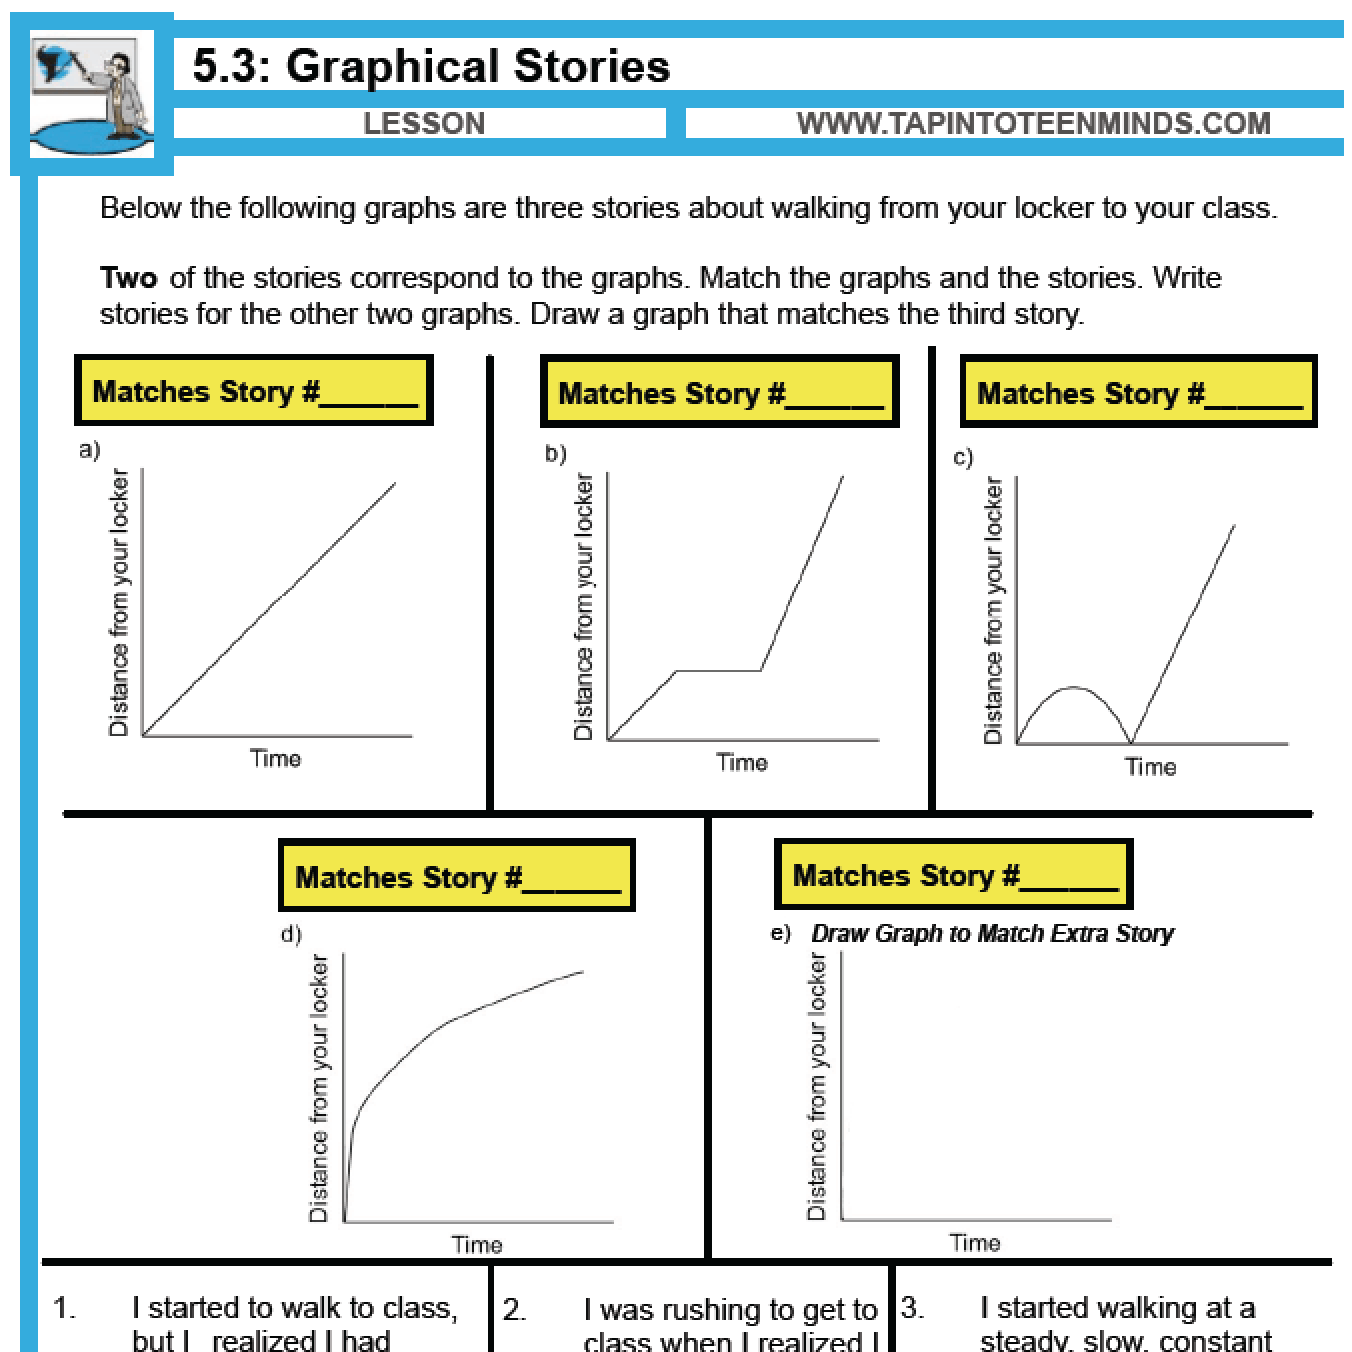 5.2 – Graphical Stories